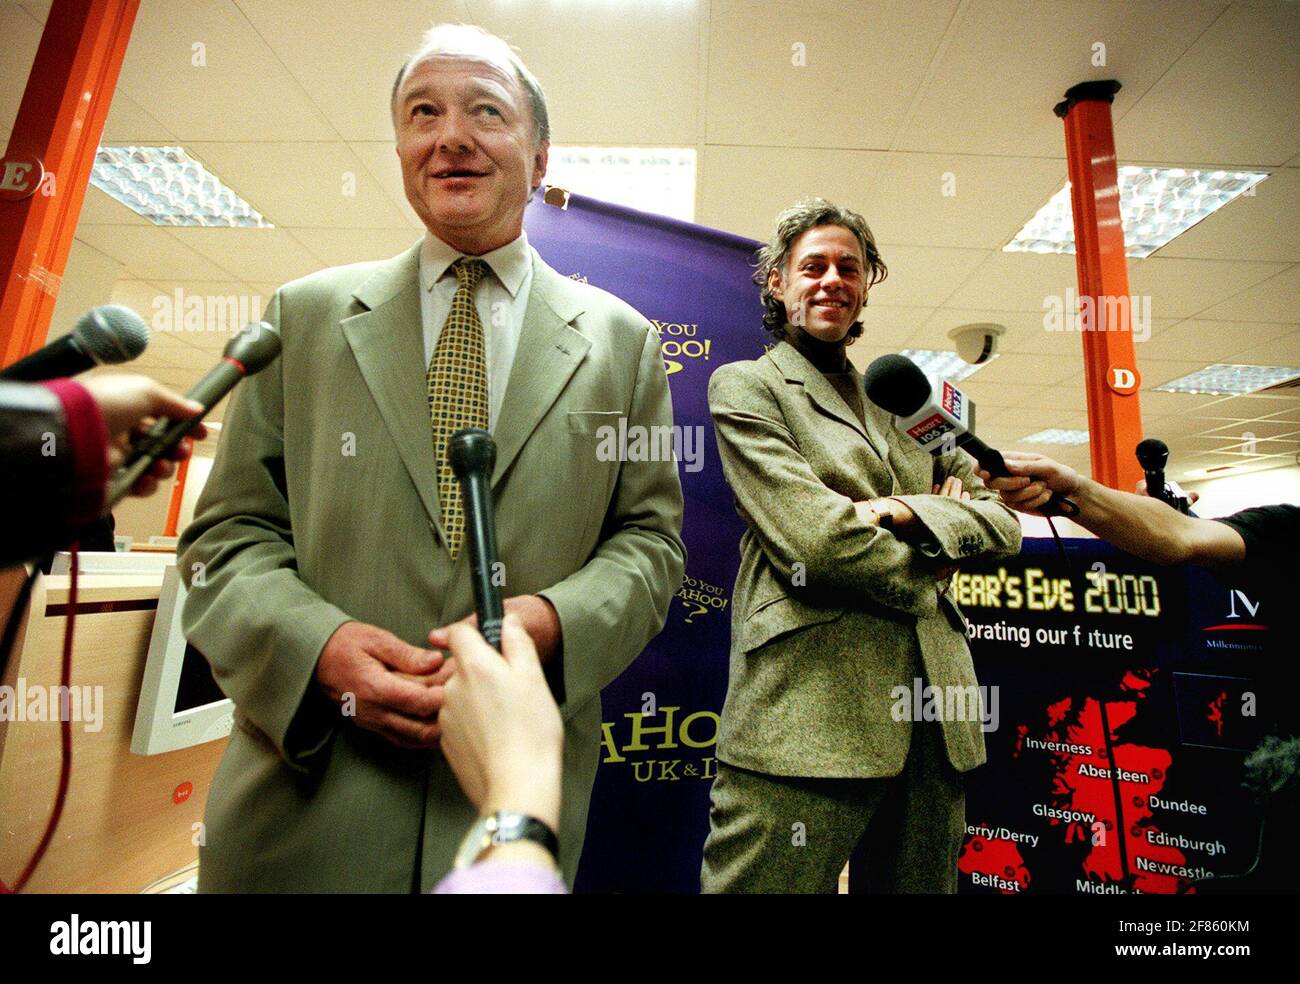 MAYOR OF LONDON KEN LIVINGSTONE OCTOBER 2000AND SIR BOB GELDOF MET TODAY TO ANNOUNCE THE PLANS FOR NEW YEARS EVE 2000. CELEBRATIONS WILL BEGIN AT NOON IN CENTRAL LONDON INCLUDING A STREET FESTIVAL, FUNFAIRS AND DANCING. AT 7pm THE CELEBRATIONS WILL CLIMAX WITH A FIREWORKS DISPLAY Stock Photo